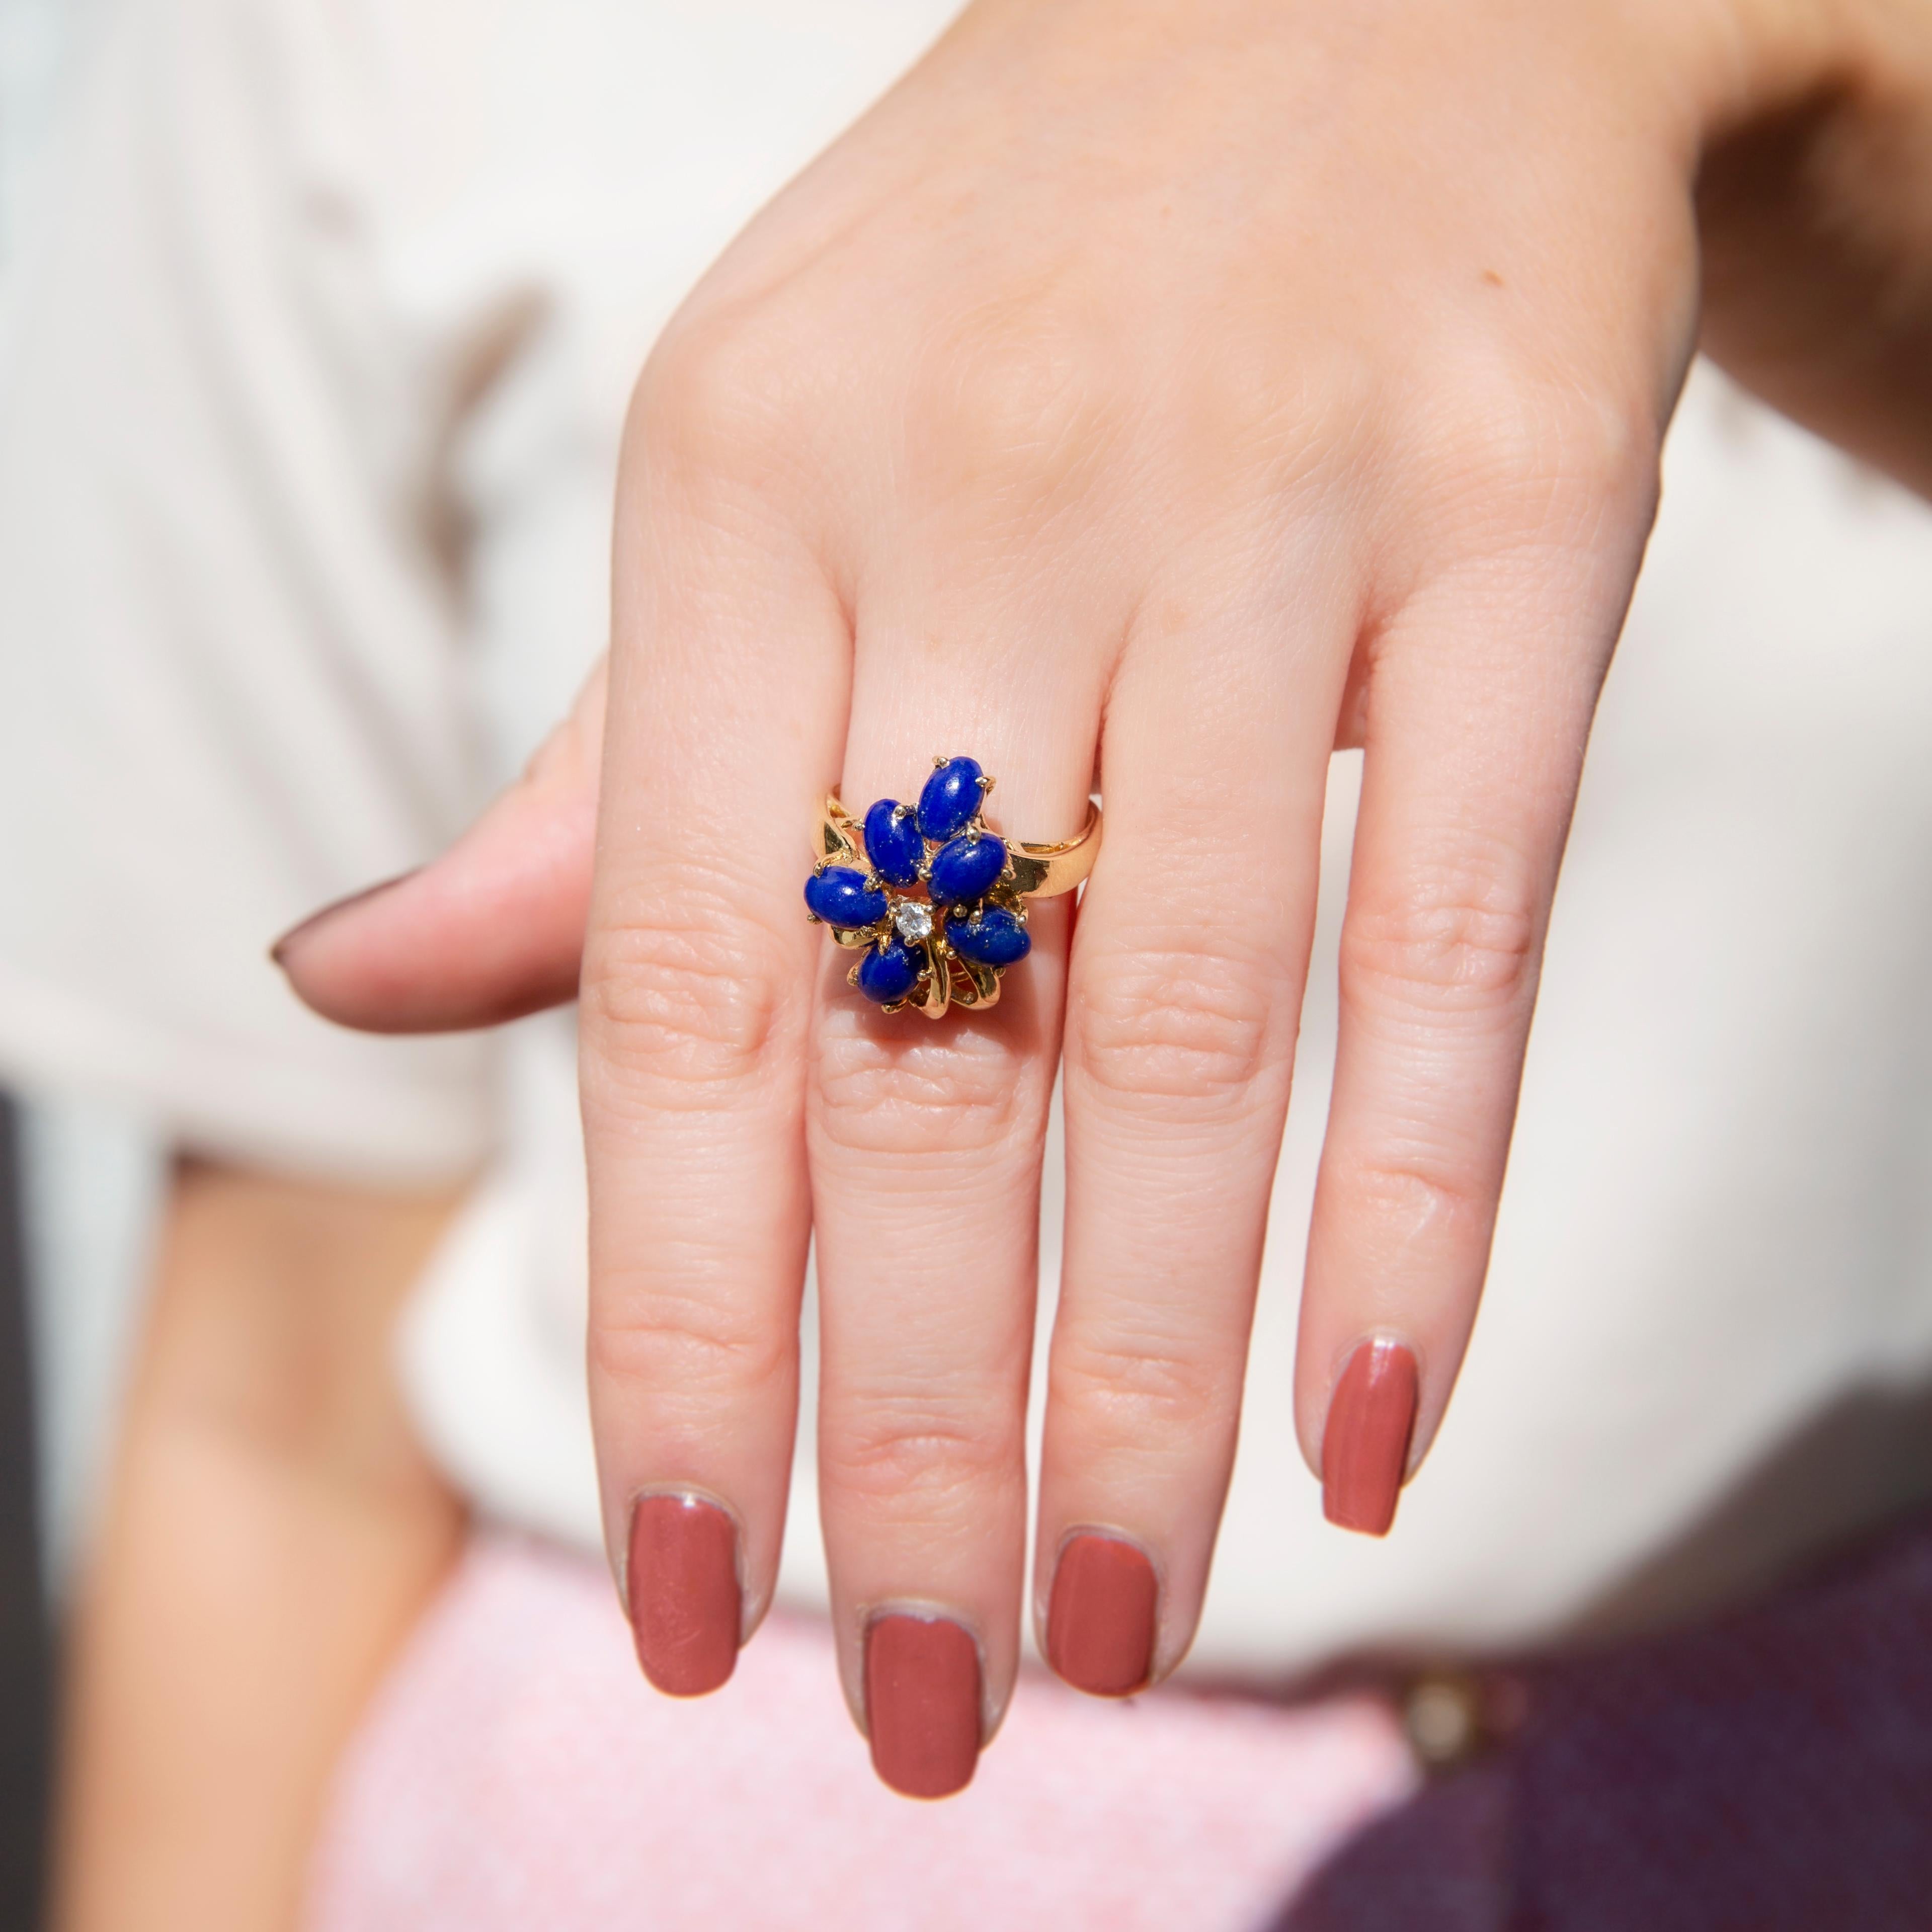 Forged in shimmering 14 carat yellow gold, this decadent vintage crossover ring, circa 1980s, features an asymmetrical cluster of six vivid oval lapis lazuli cabochons with a single round brilliant cut diamond glistening at the centre. This truly